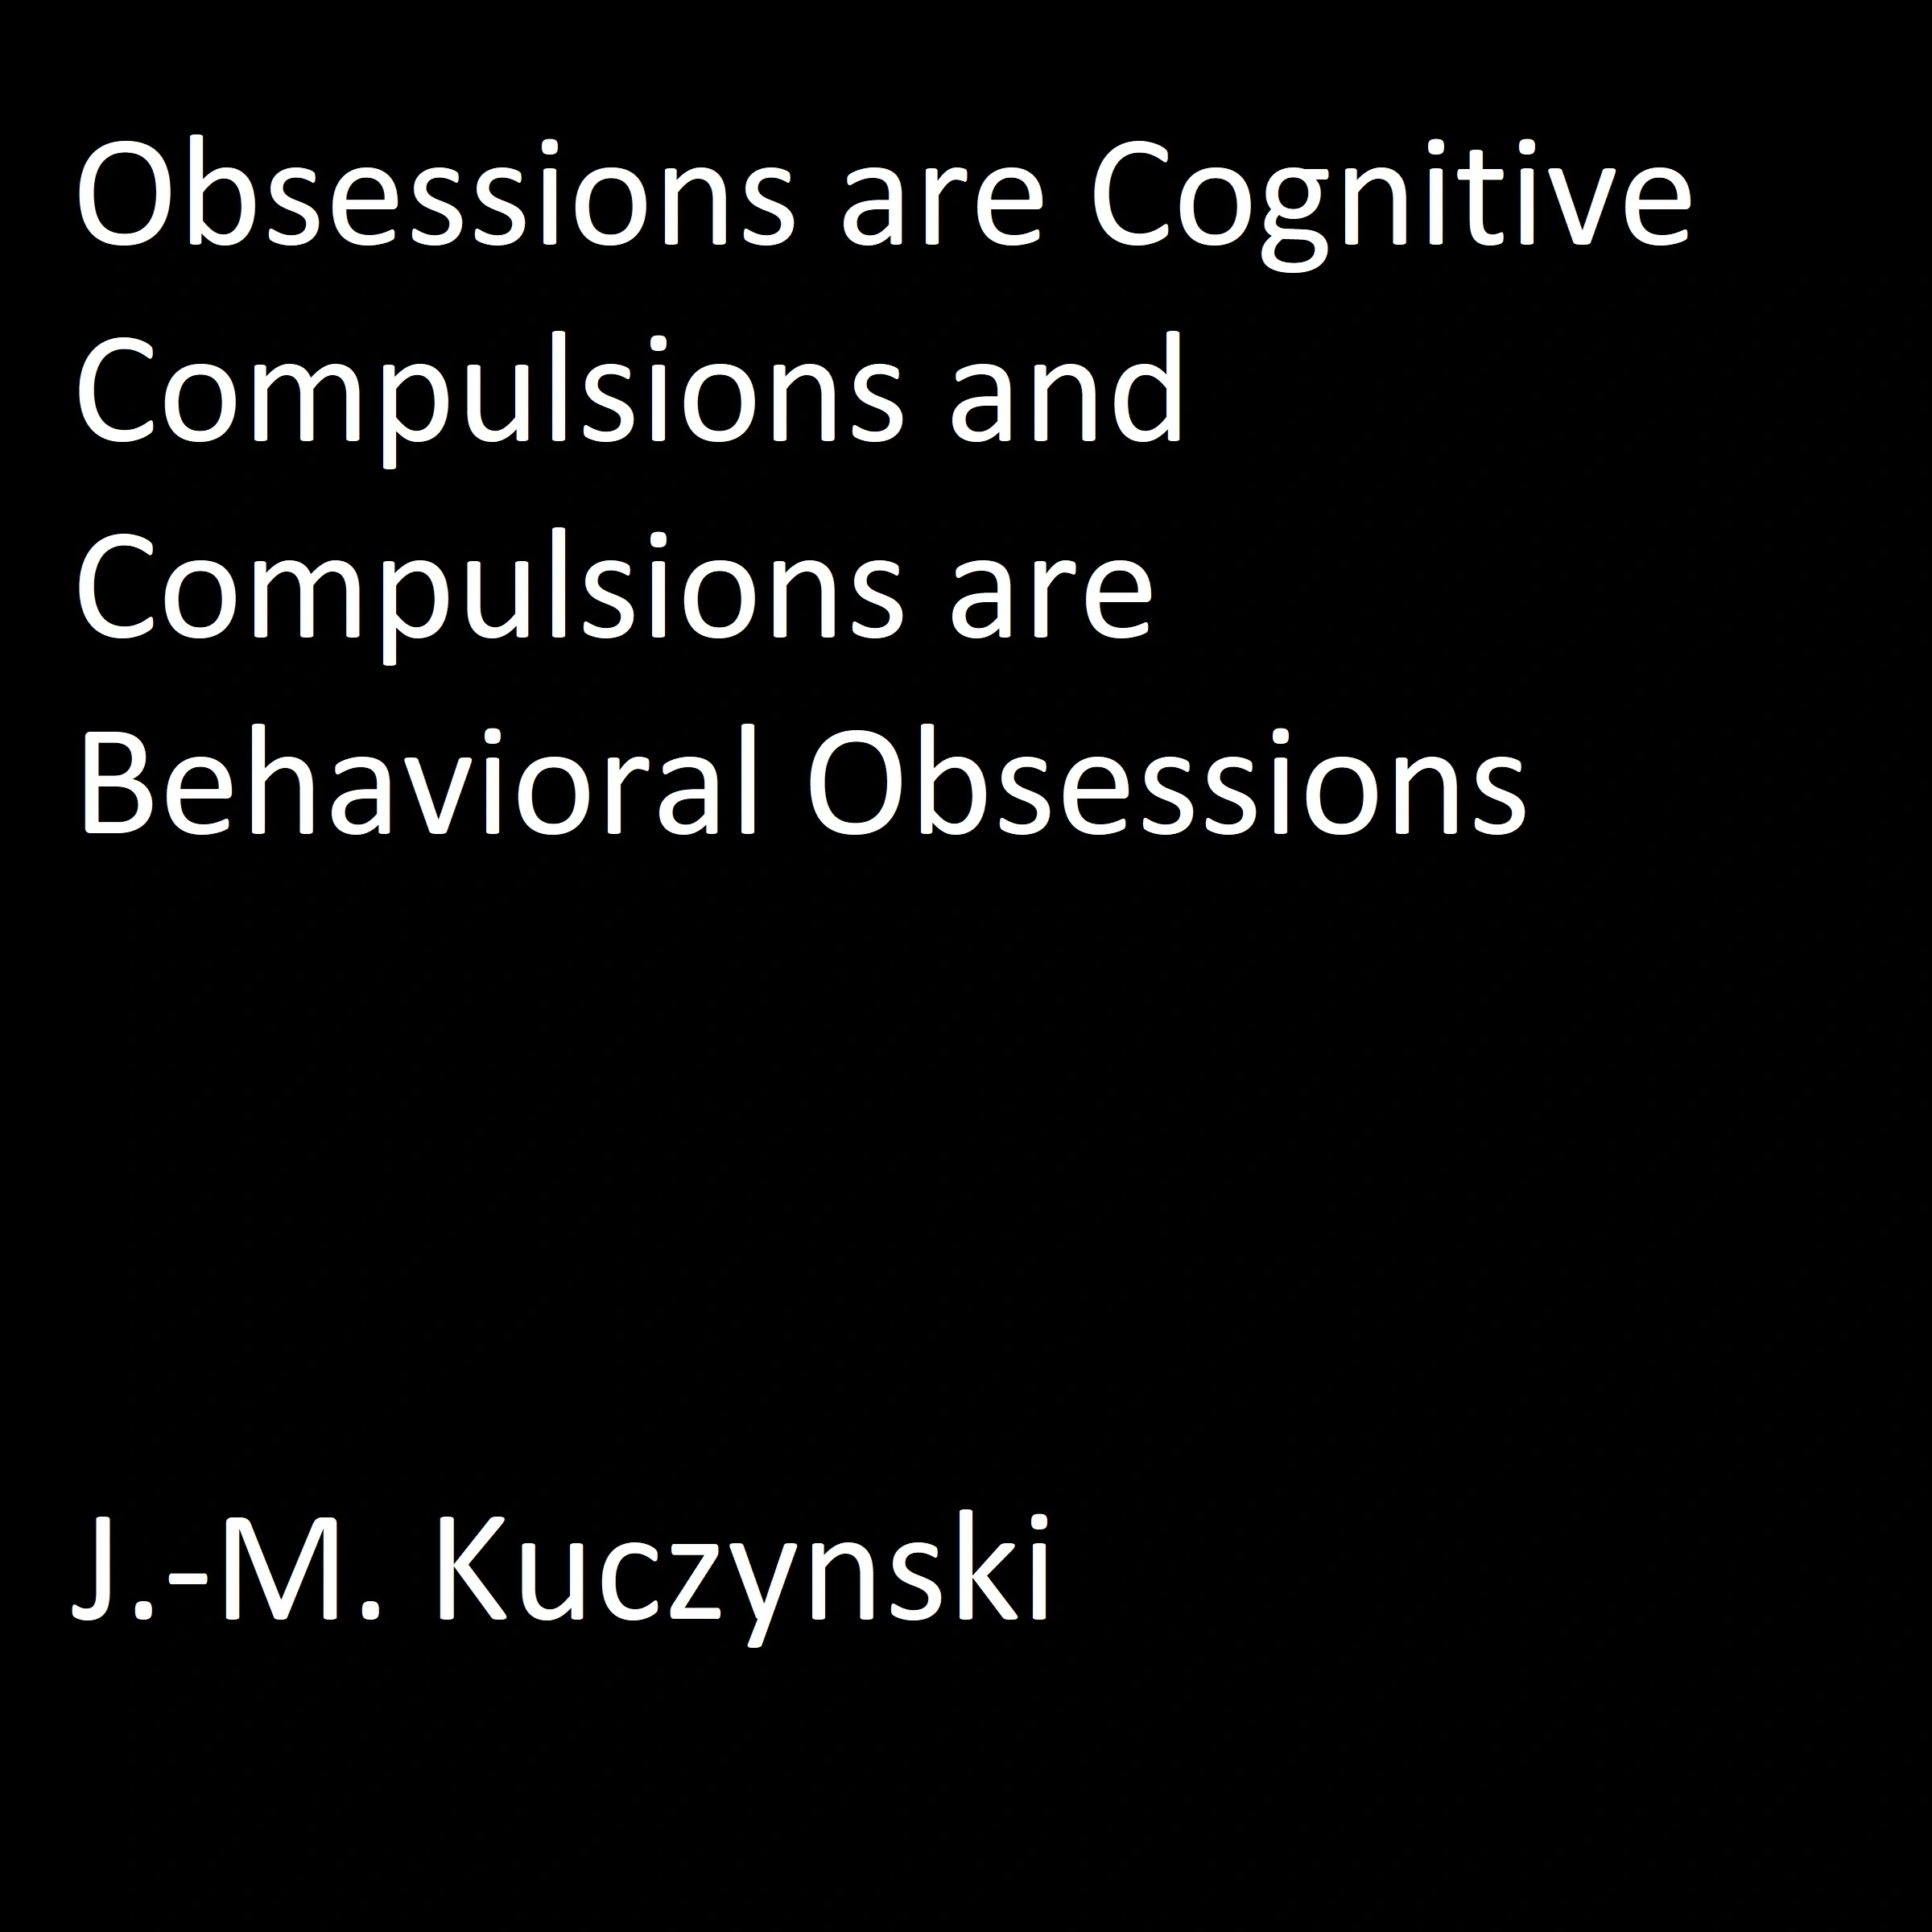 Obsessions are Cognitive Compulsions and Compulsions are Behavioral Obsessions Audiobook by J.-M. Kuczynski